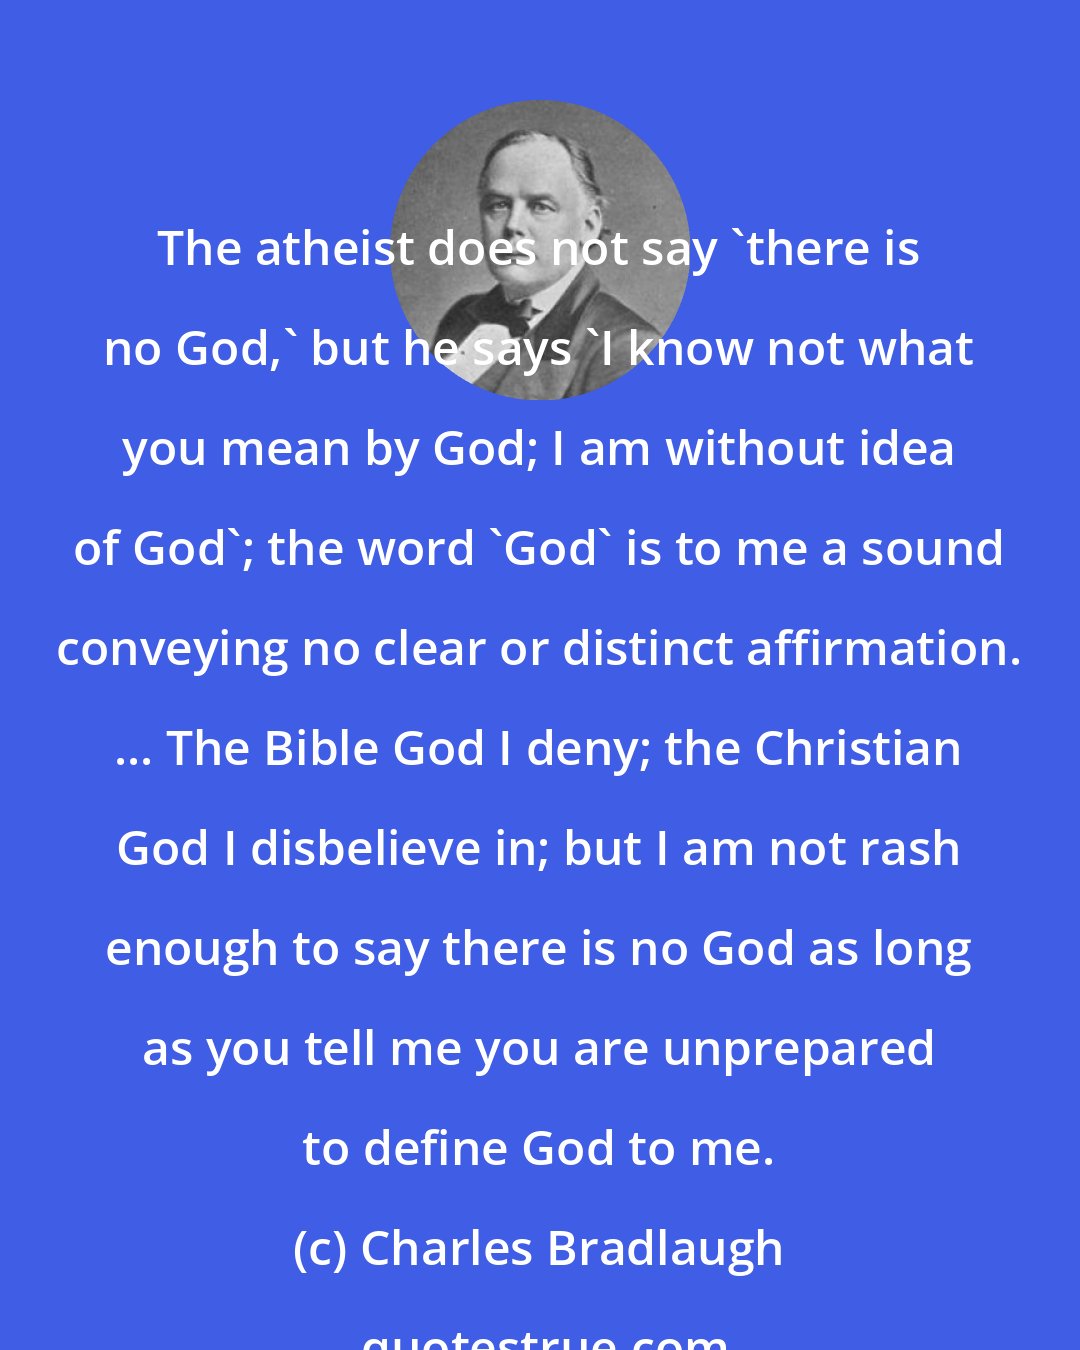 Charles Bradlaugh: The atheist does not say 'there is no God,' but he says 'I know not what you mean by God; I am without idea of God'; the word 'God' is to me a sound conveying no clear or distinct affirmation. ... The Bible God I deny; the Christian God I disbelieve in; but I am not rash enough to say there is no God as long as you tell me you are unprepared to define God to me.